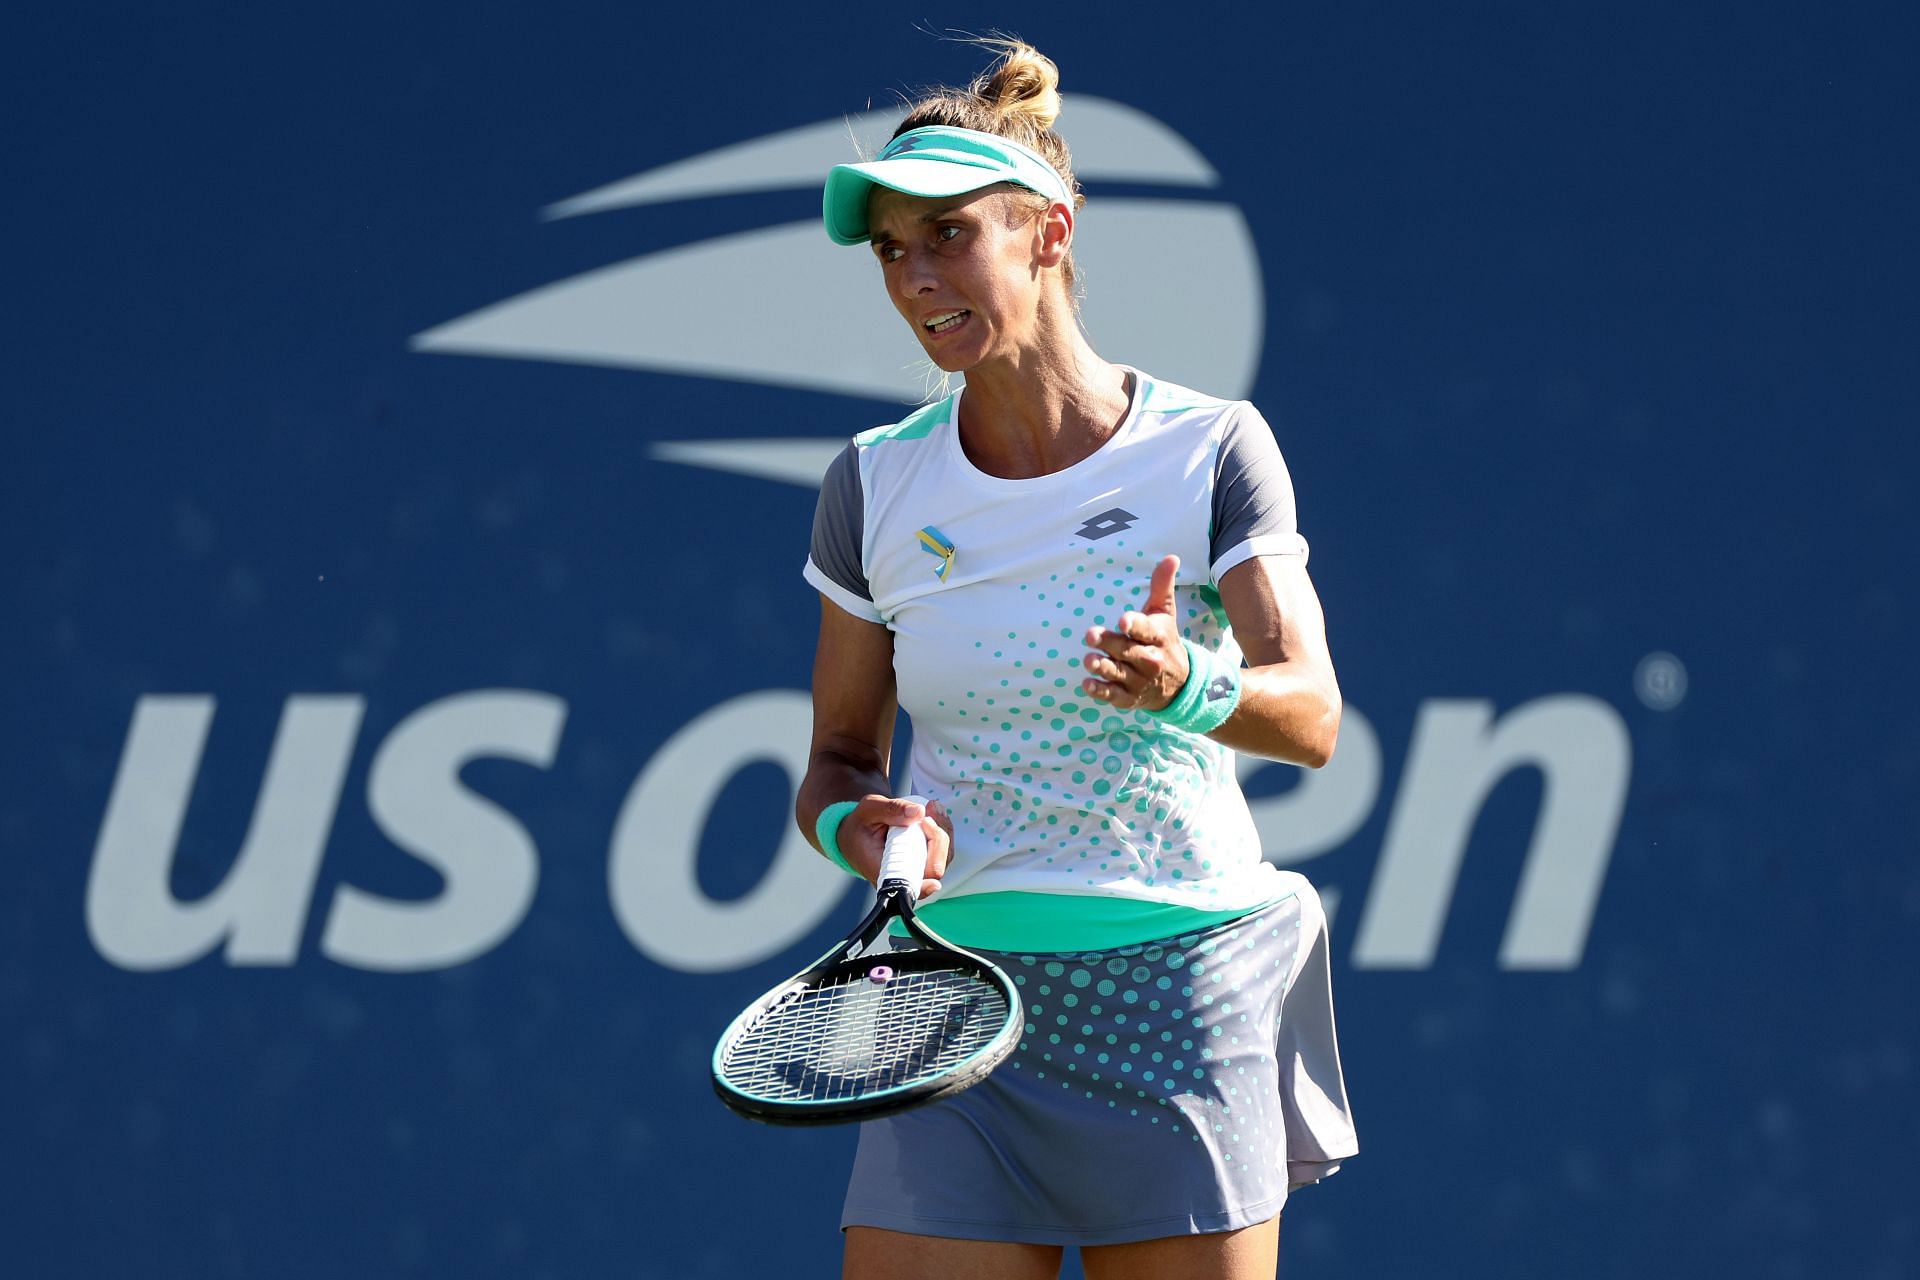 Tsurenko reacts during a point at the 2022 US Open